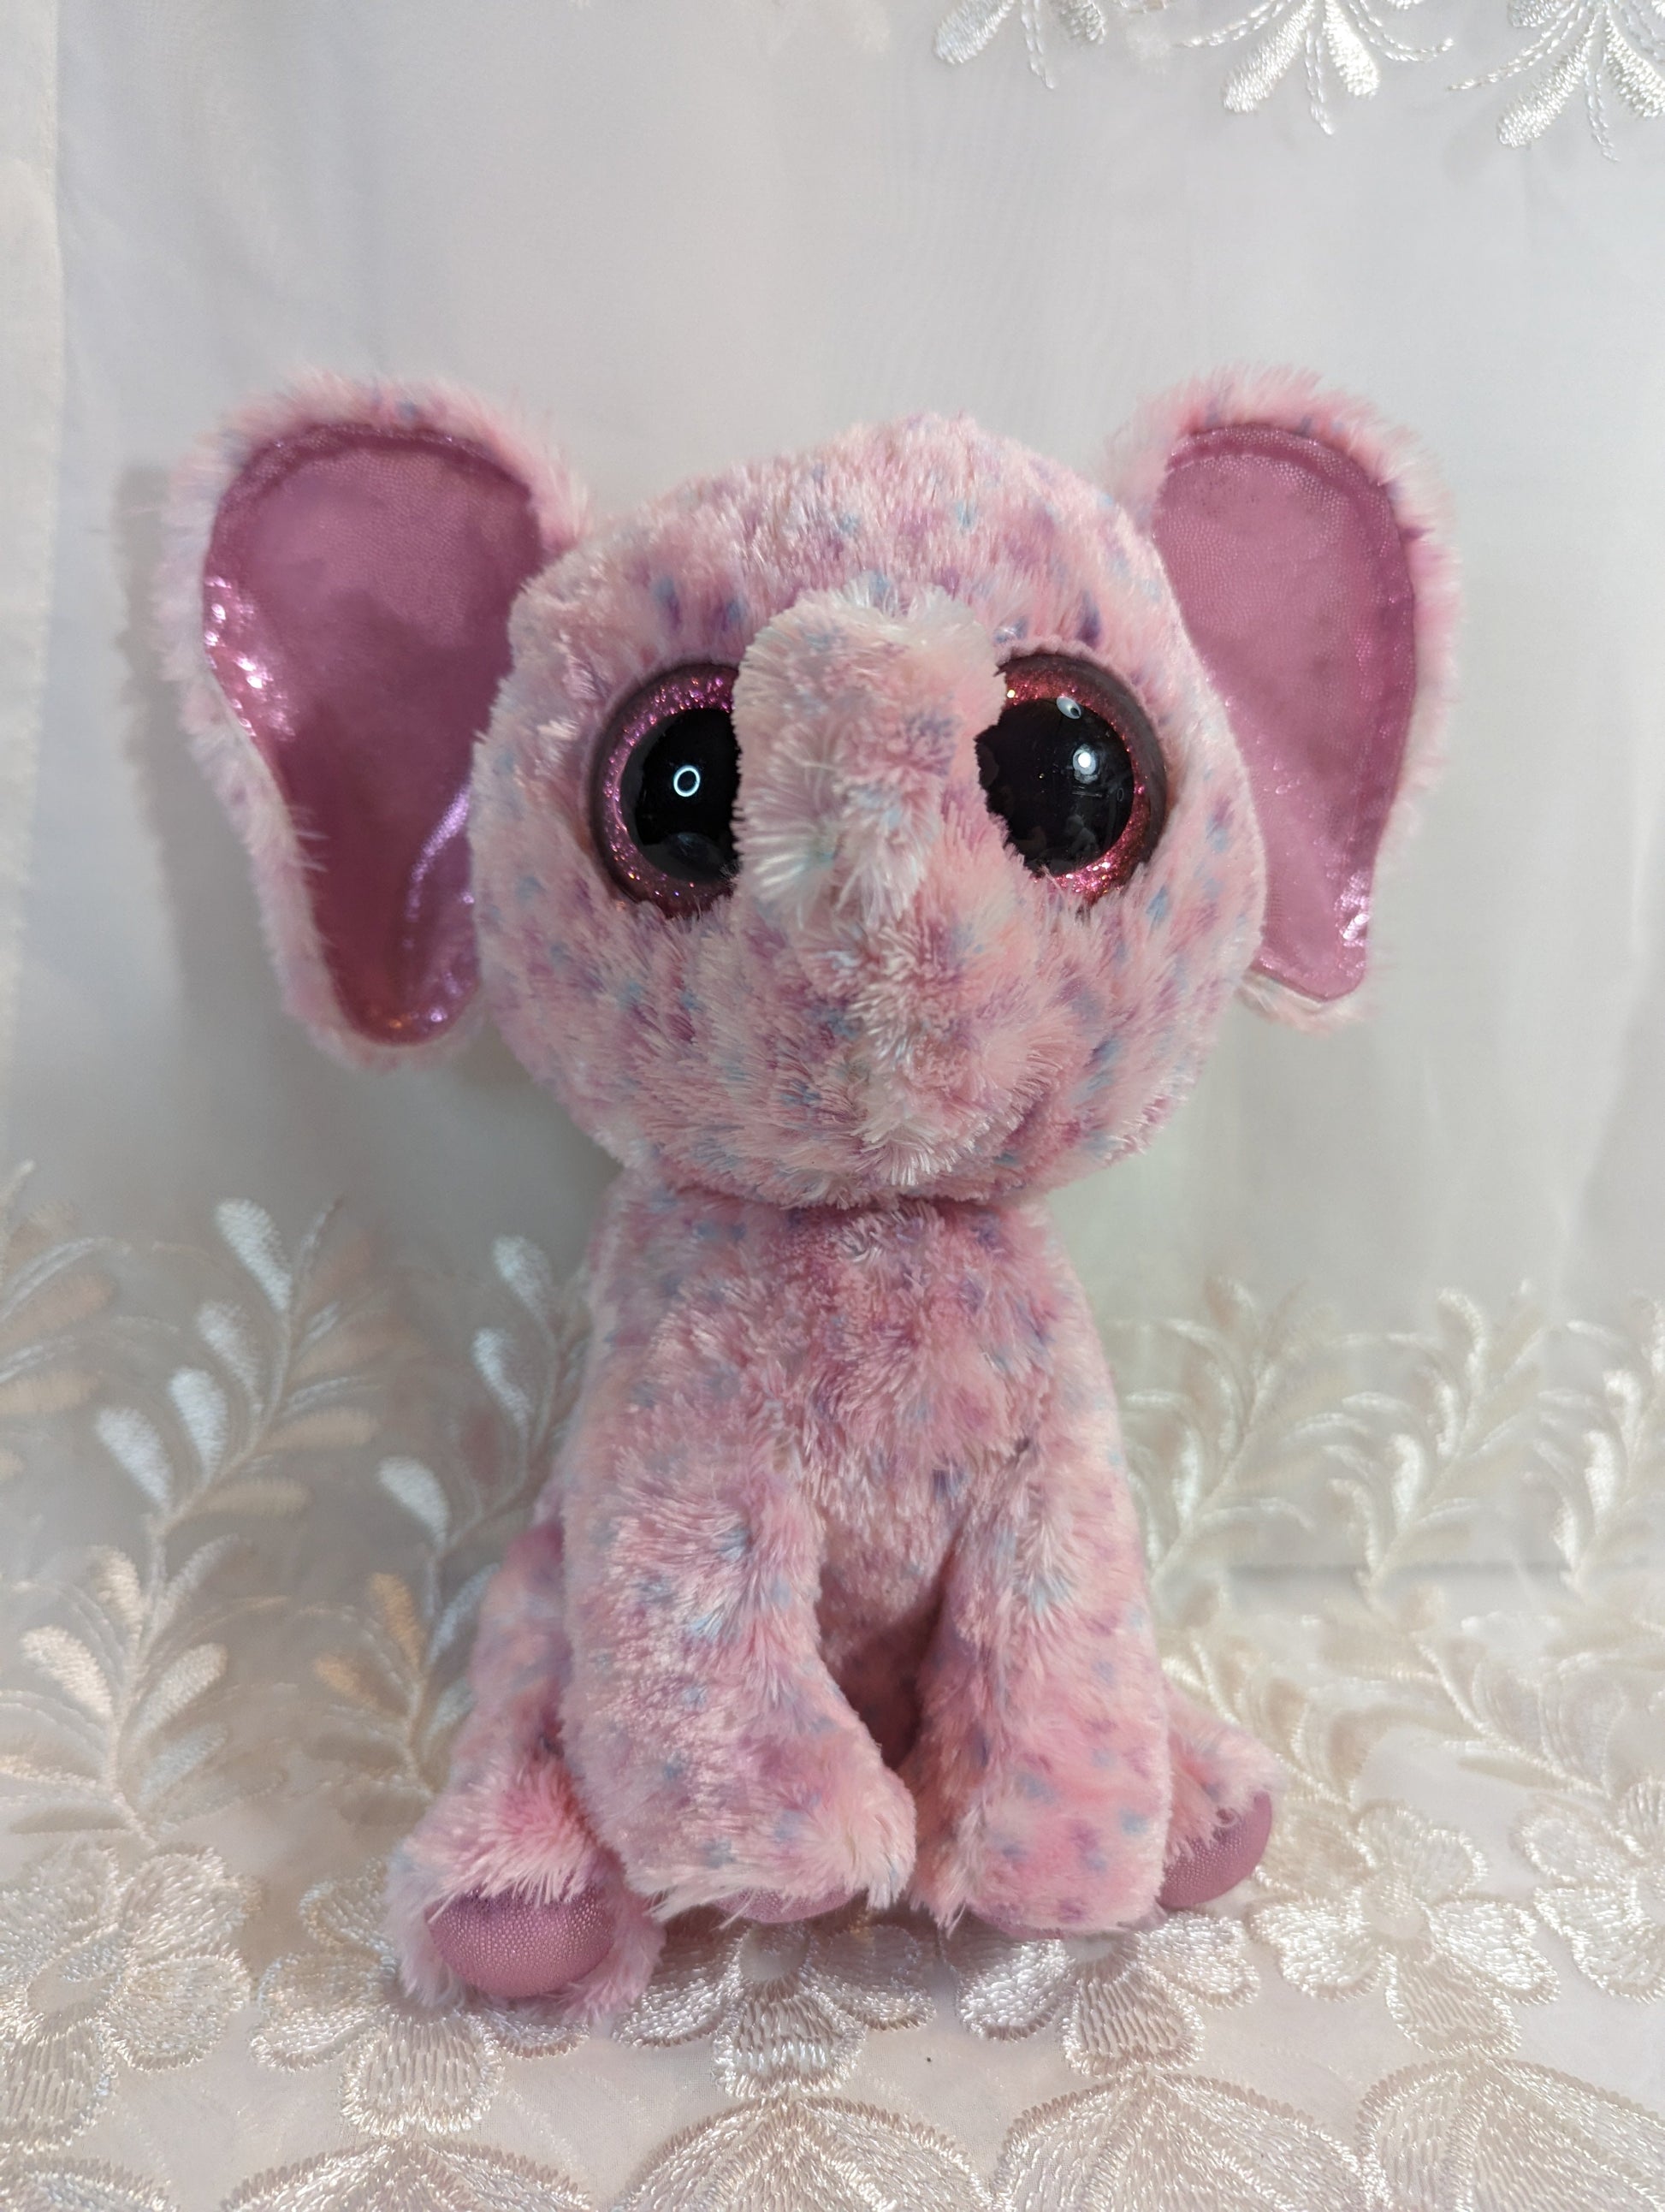 Ty Beanie Boo - Ellie the elephant (9in) No Tag, Scuffed Eyes - Vintage Beanies Canada